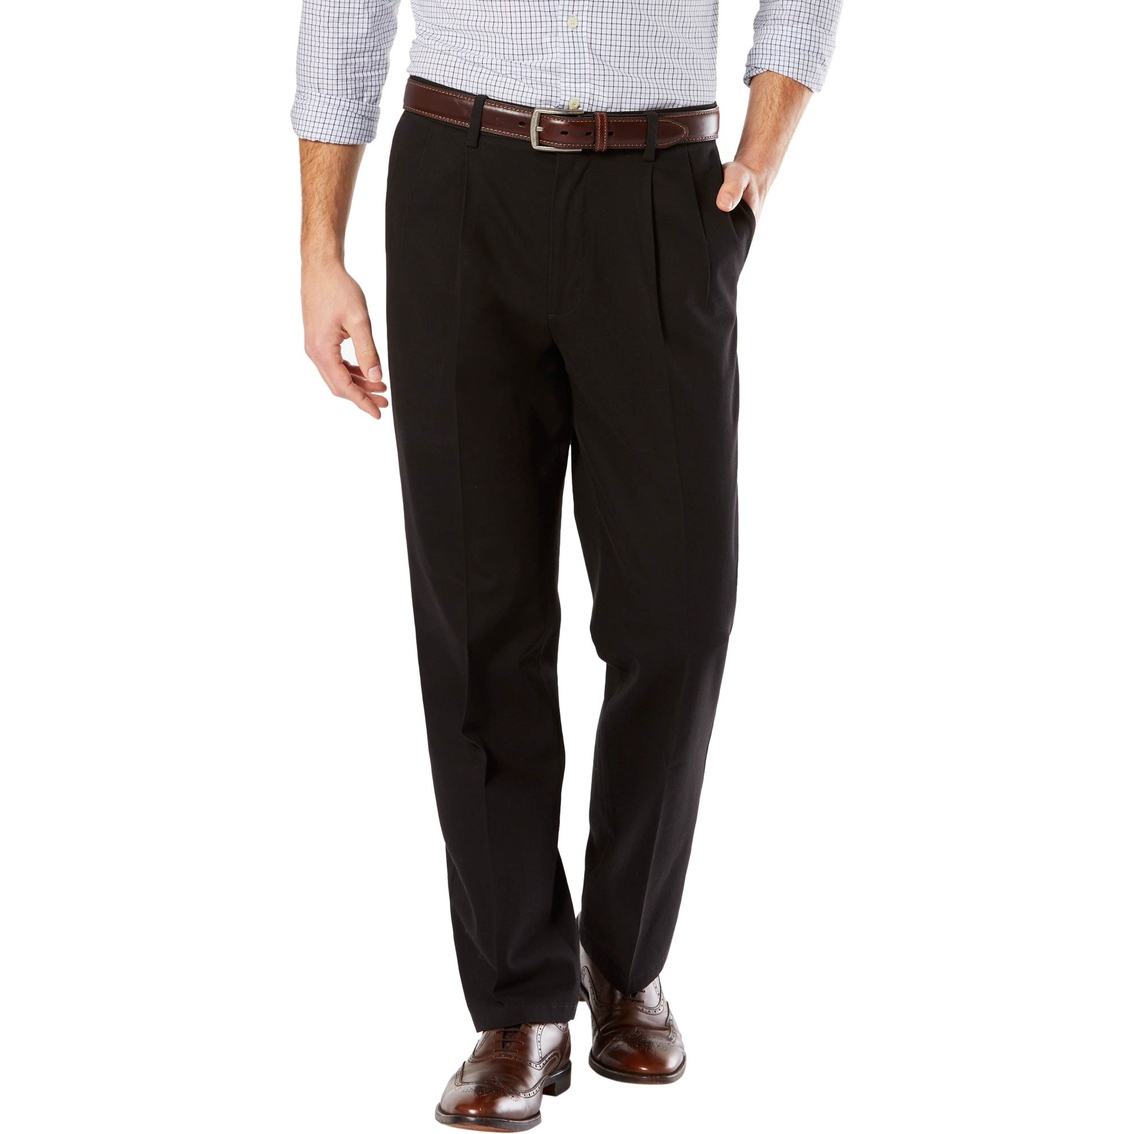 Dockers Classic Fit Signature Stretch Pants | Pants | Clothing ...